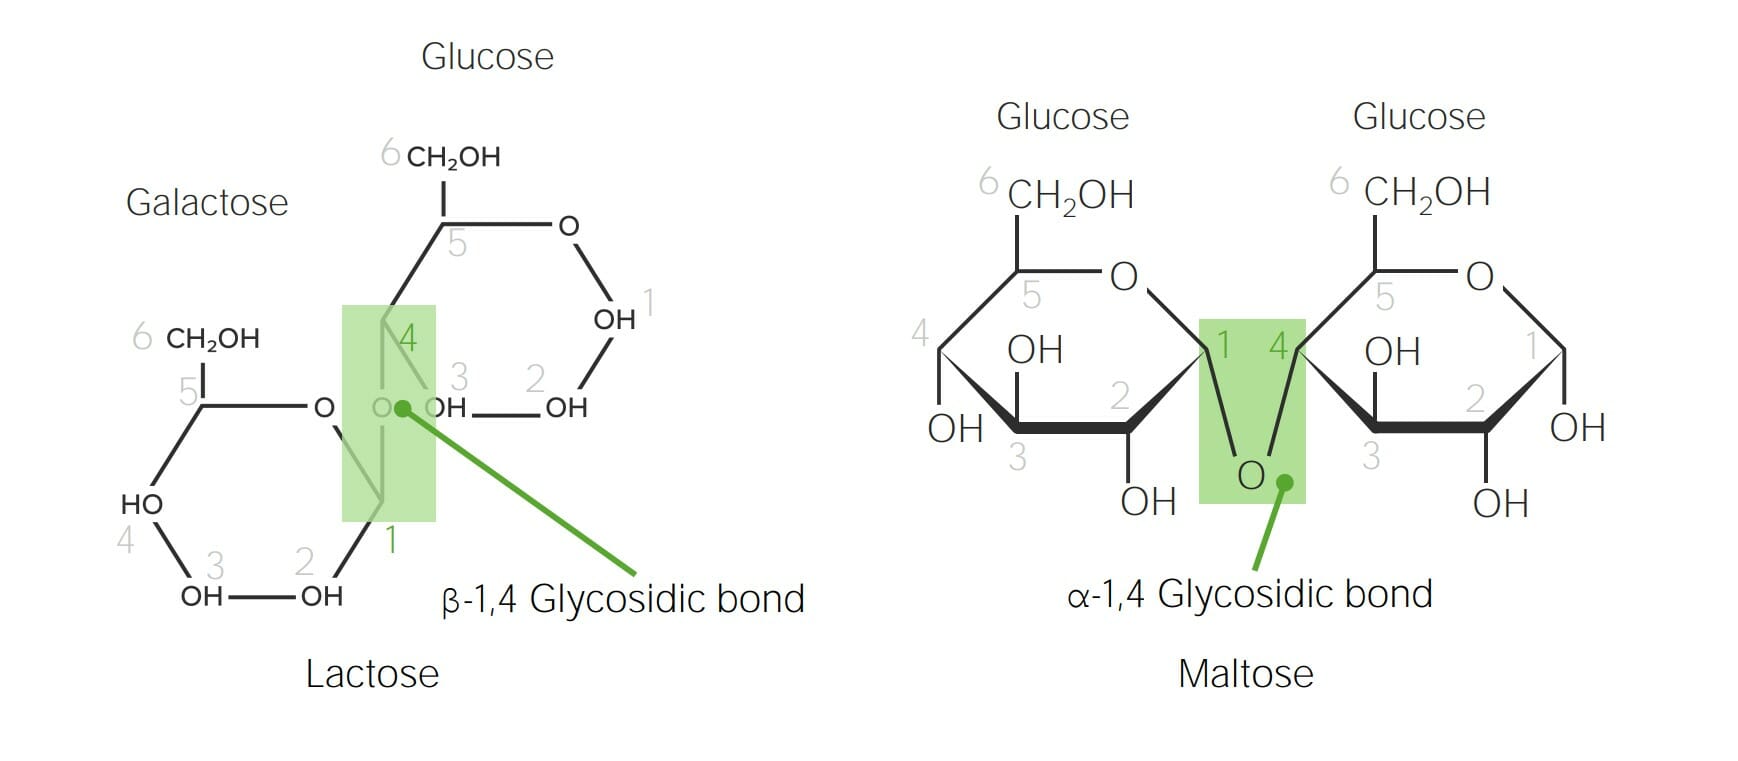 Chemical structure of lactose and maltose demonstrating α versus β glycosidic bonds